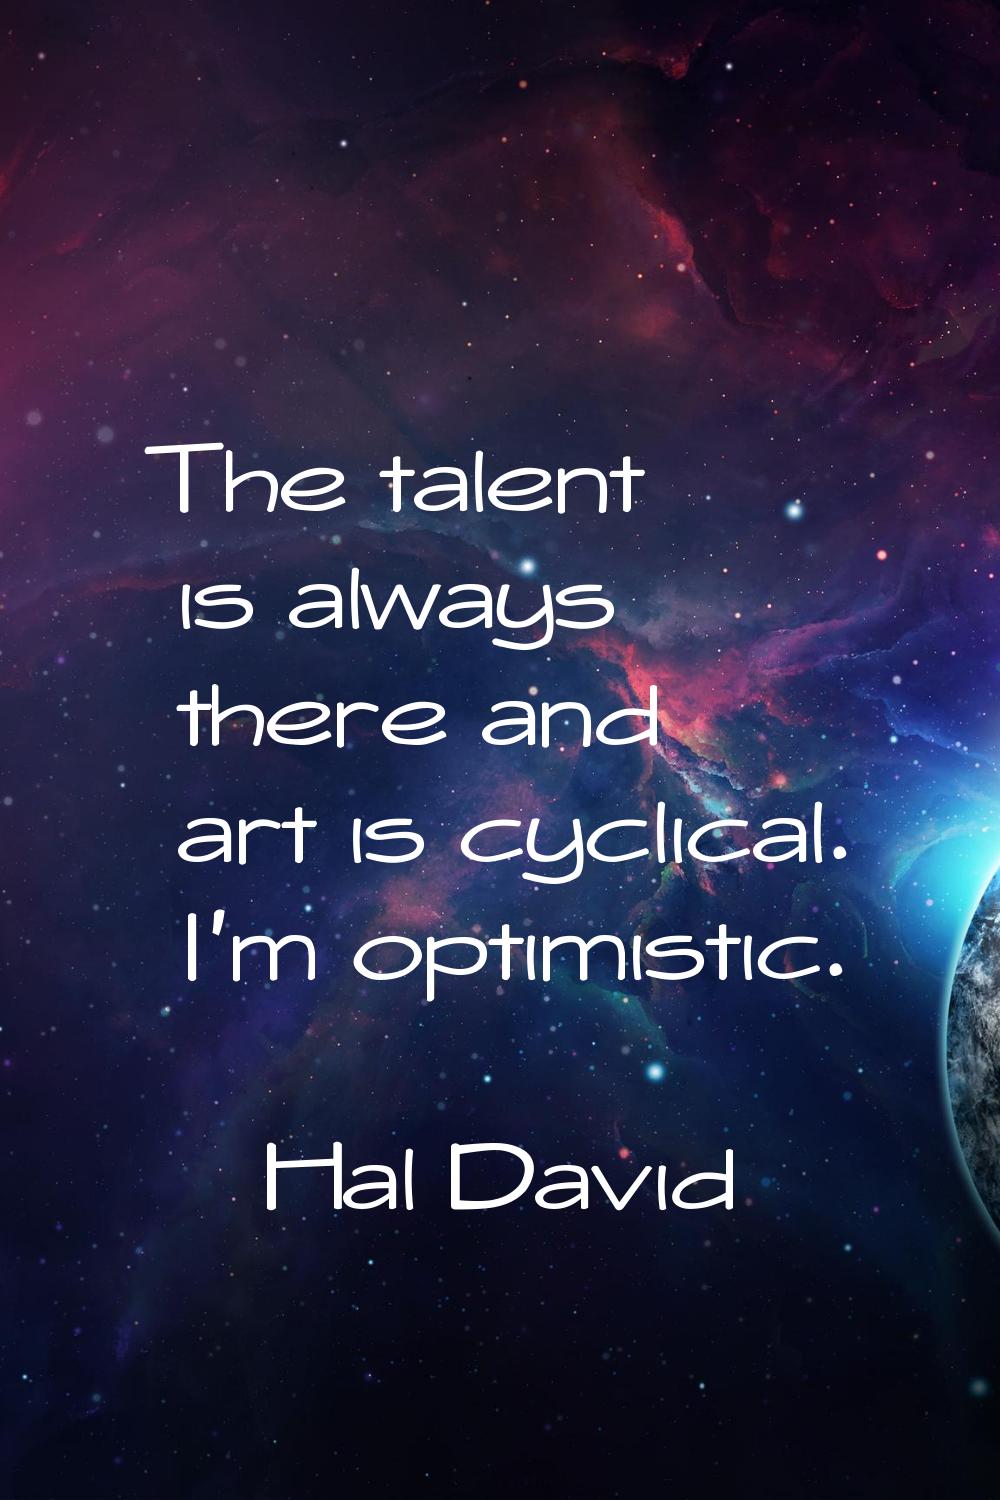 The talent is always there and art is cyclical. I'm optimistic.